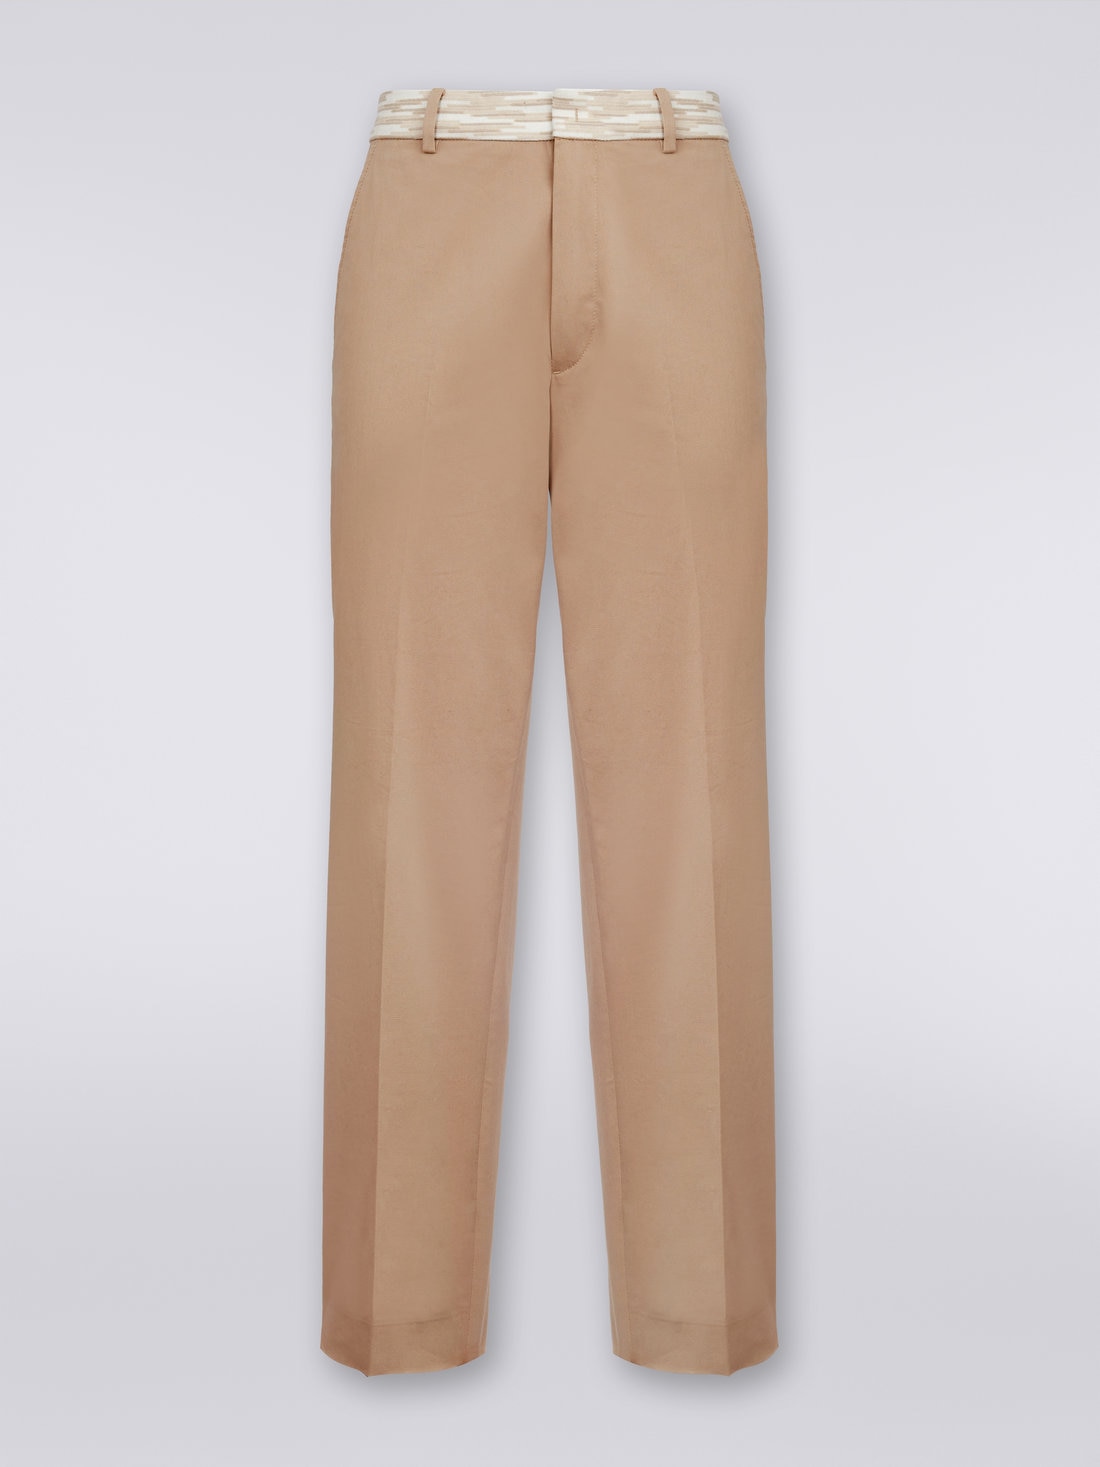 Cotton trousers with slub inserts, White  - US23WI05BW00OUS0192 - 0